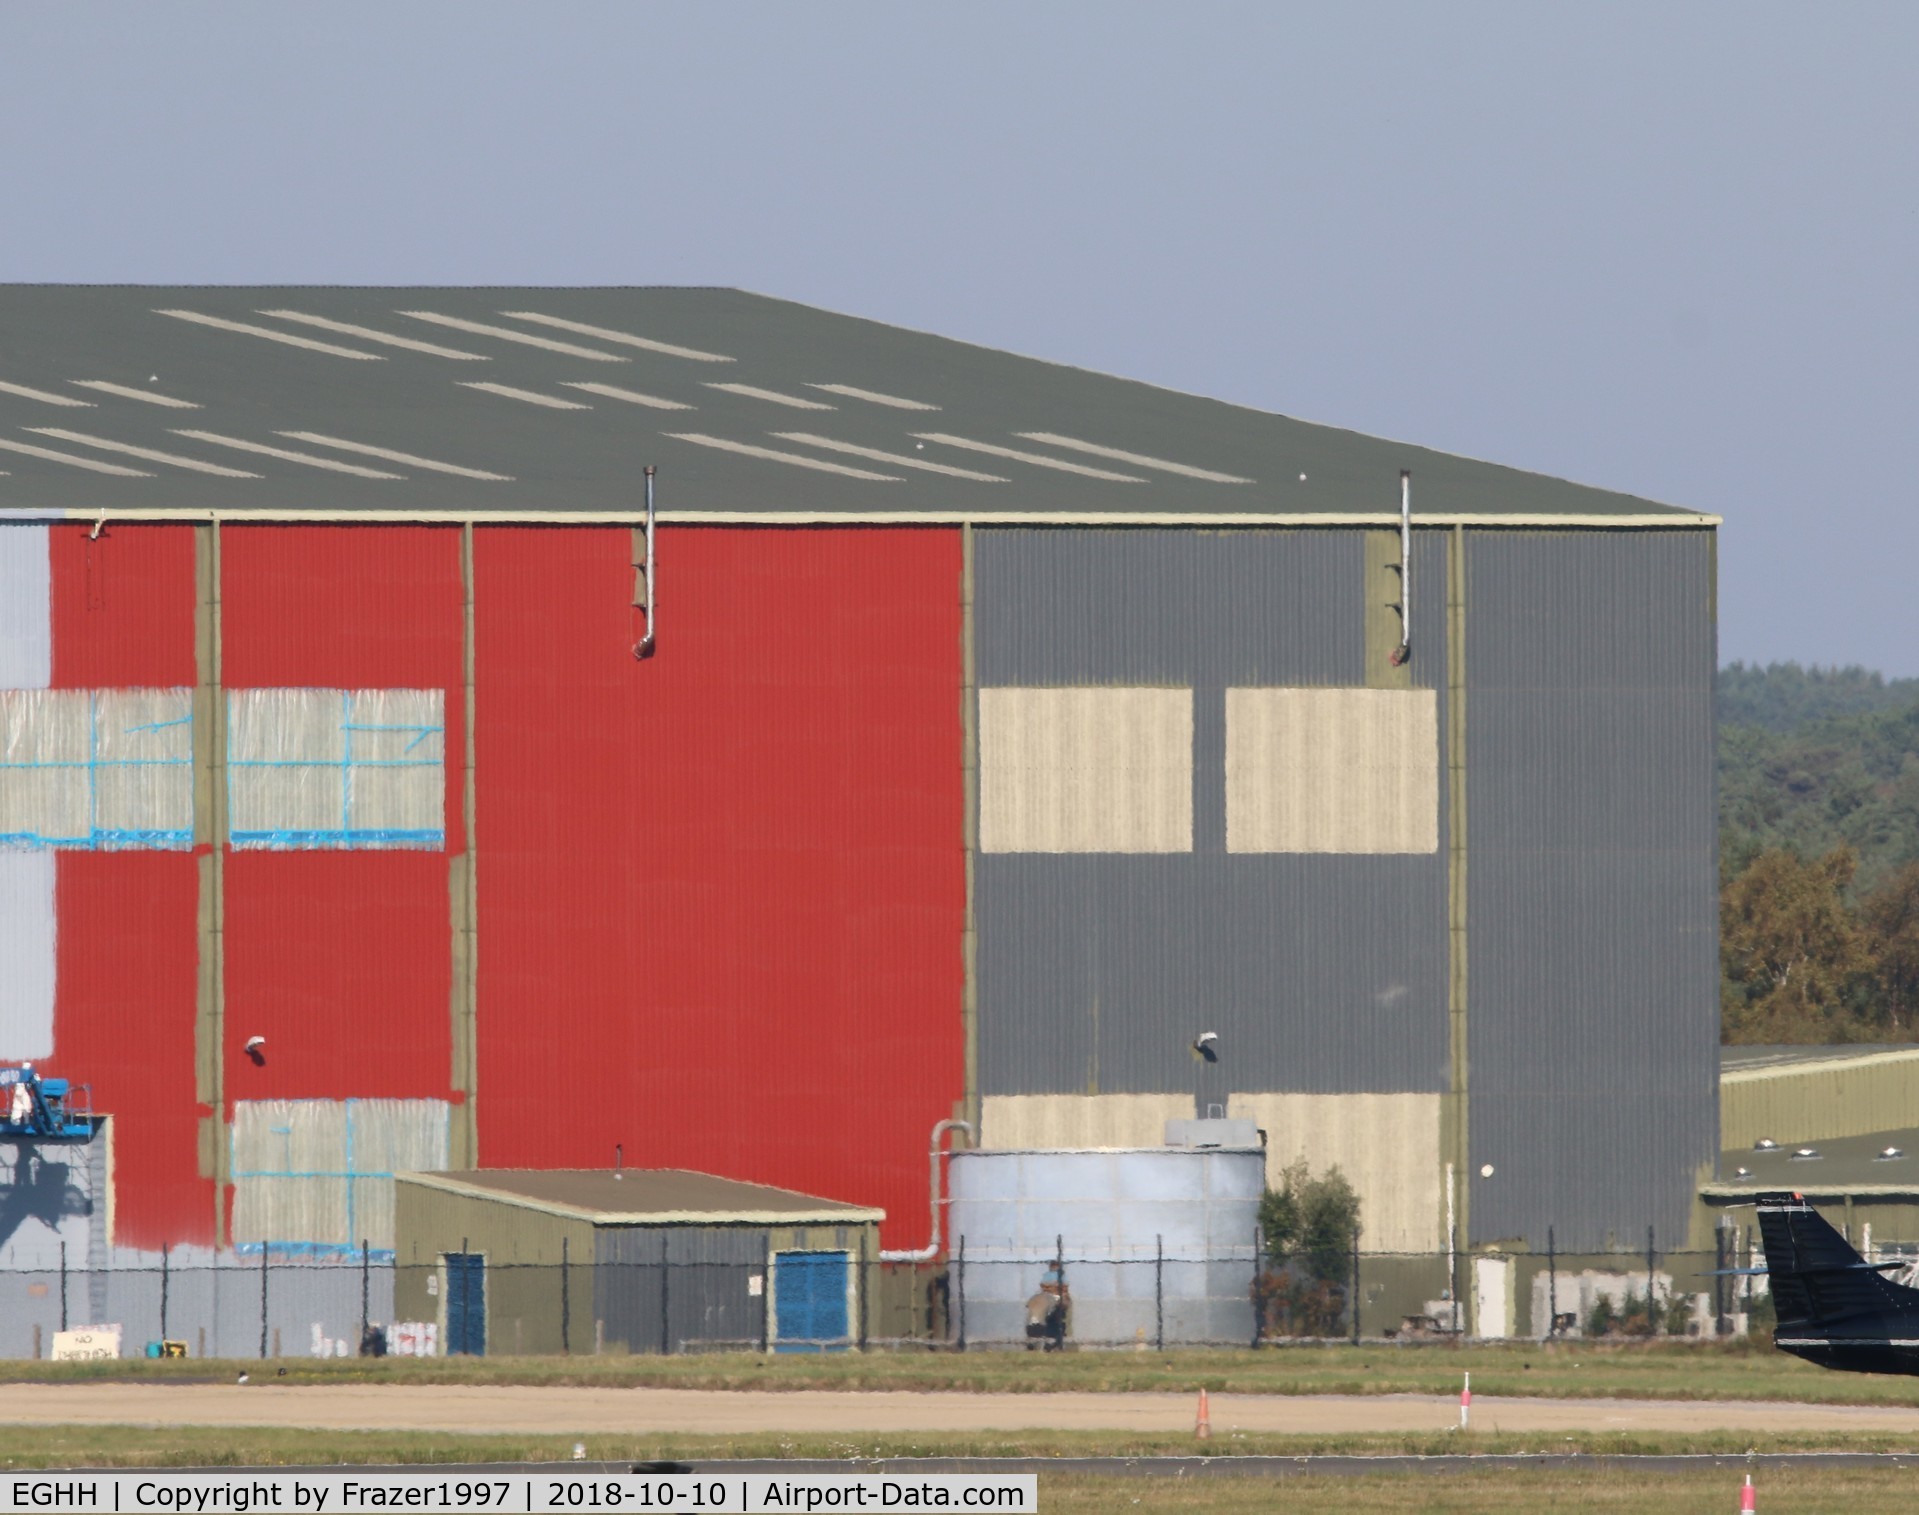 Bournemouth Airport, Bournemouth, England United Kingdom (EGHH) - The Large hanger at Bournemouth previously used to store the 747'8 BBJVQ-BSK being painted for the new owners GAMA Aviation. 